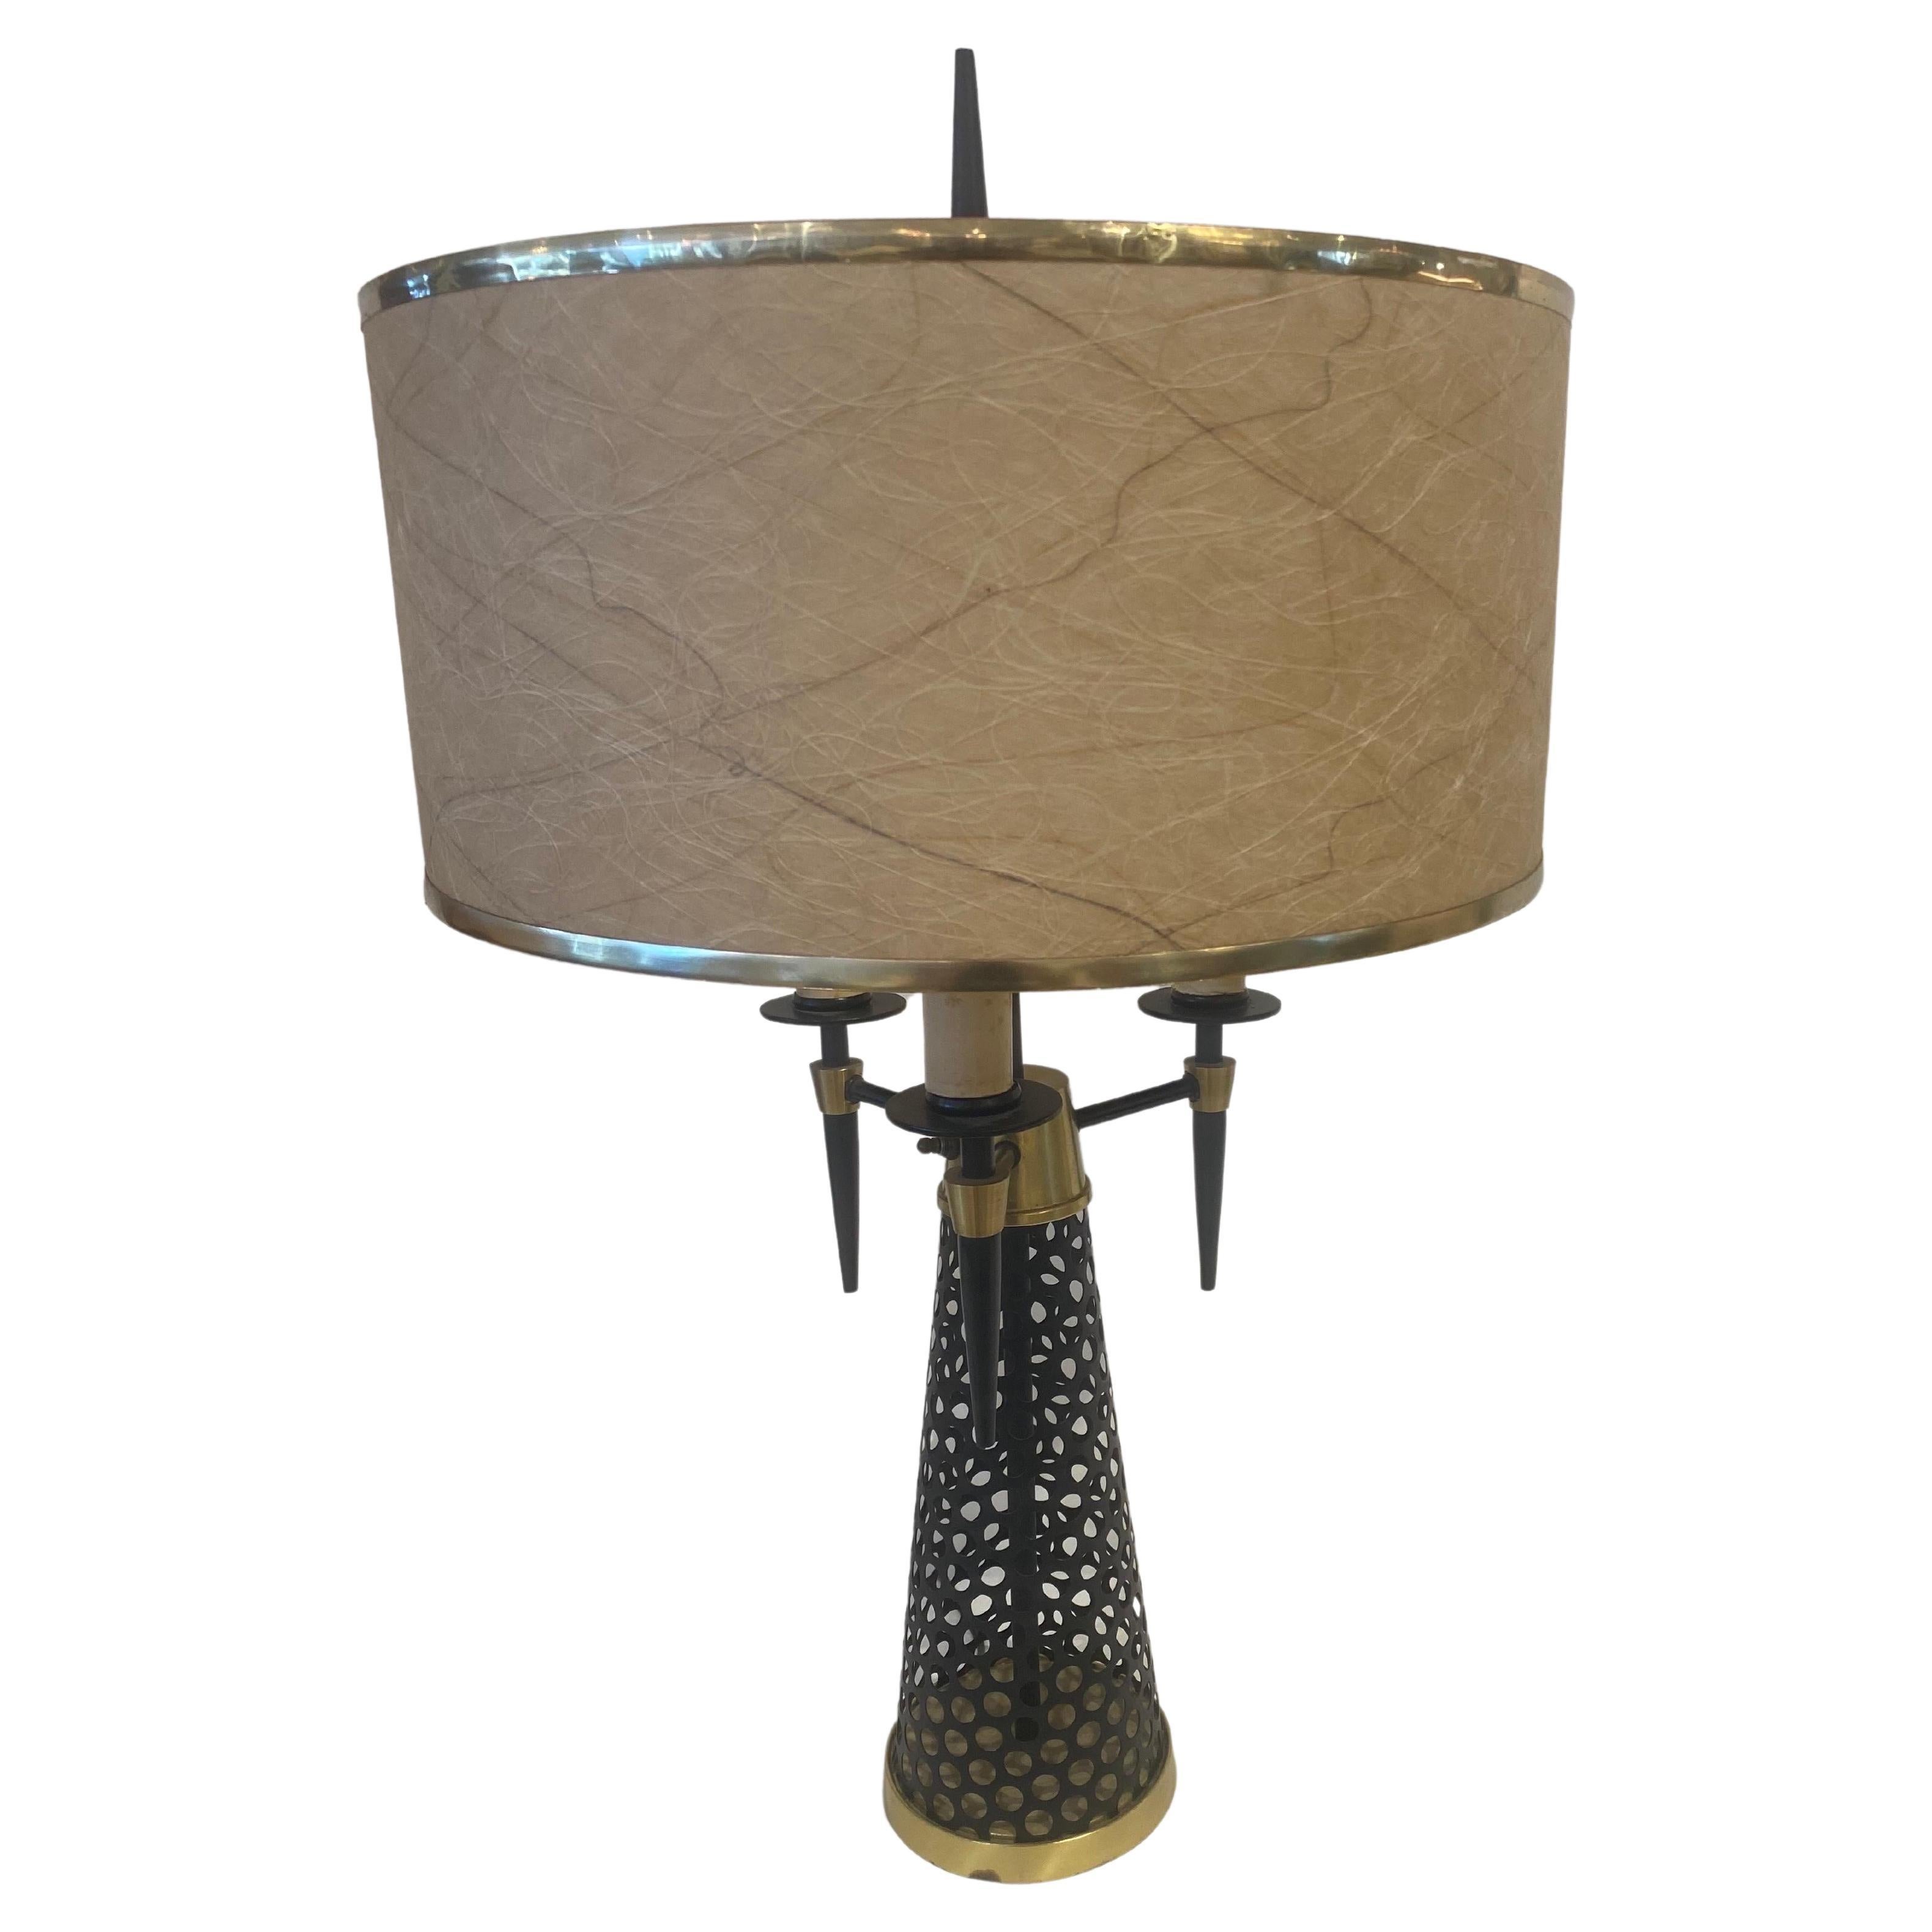 This wonderful black perforated metal cone base with brass base and accents throughout, has 3 Edison standard bulbs and finial. Original brass trimmed shade shown is included.  THIS ITEM IS LOCATED AND WILL SHIP FROM OUR MIAMI, FLORIDA SHOWROOM.